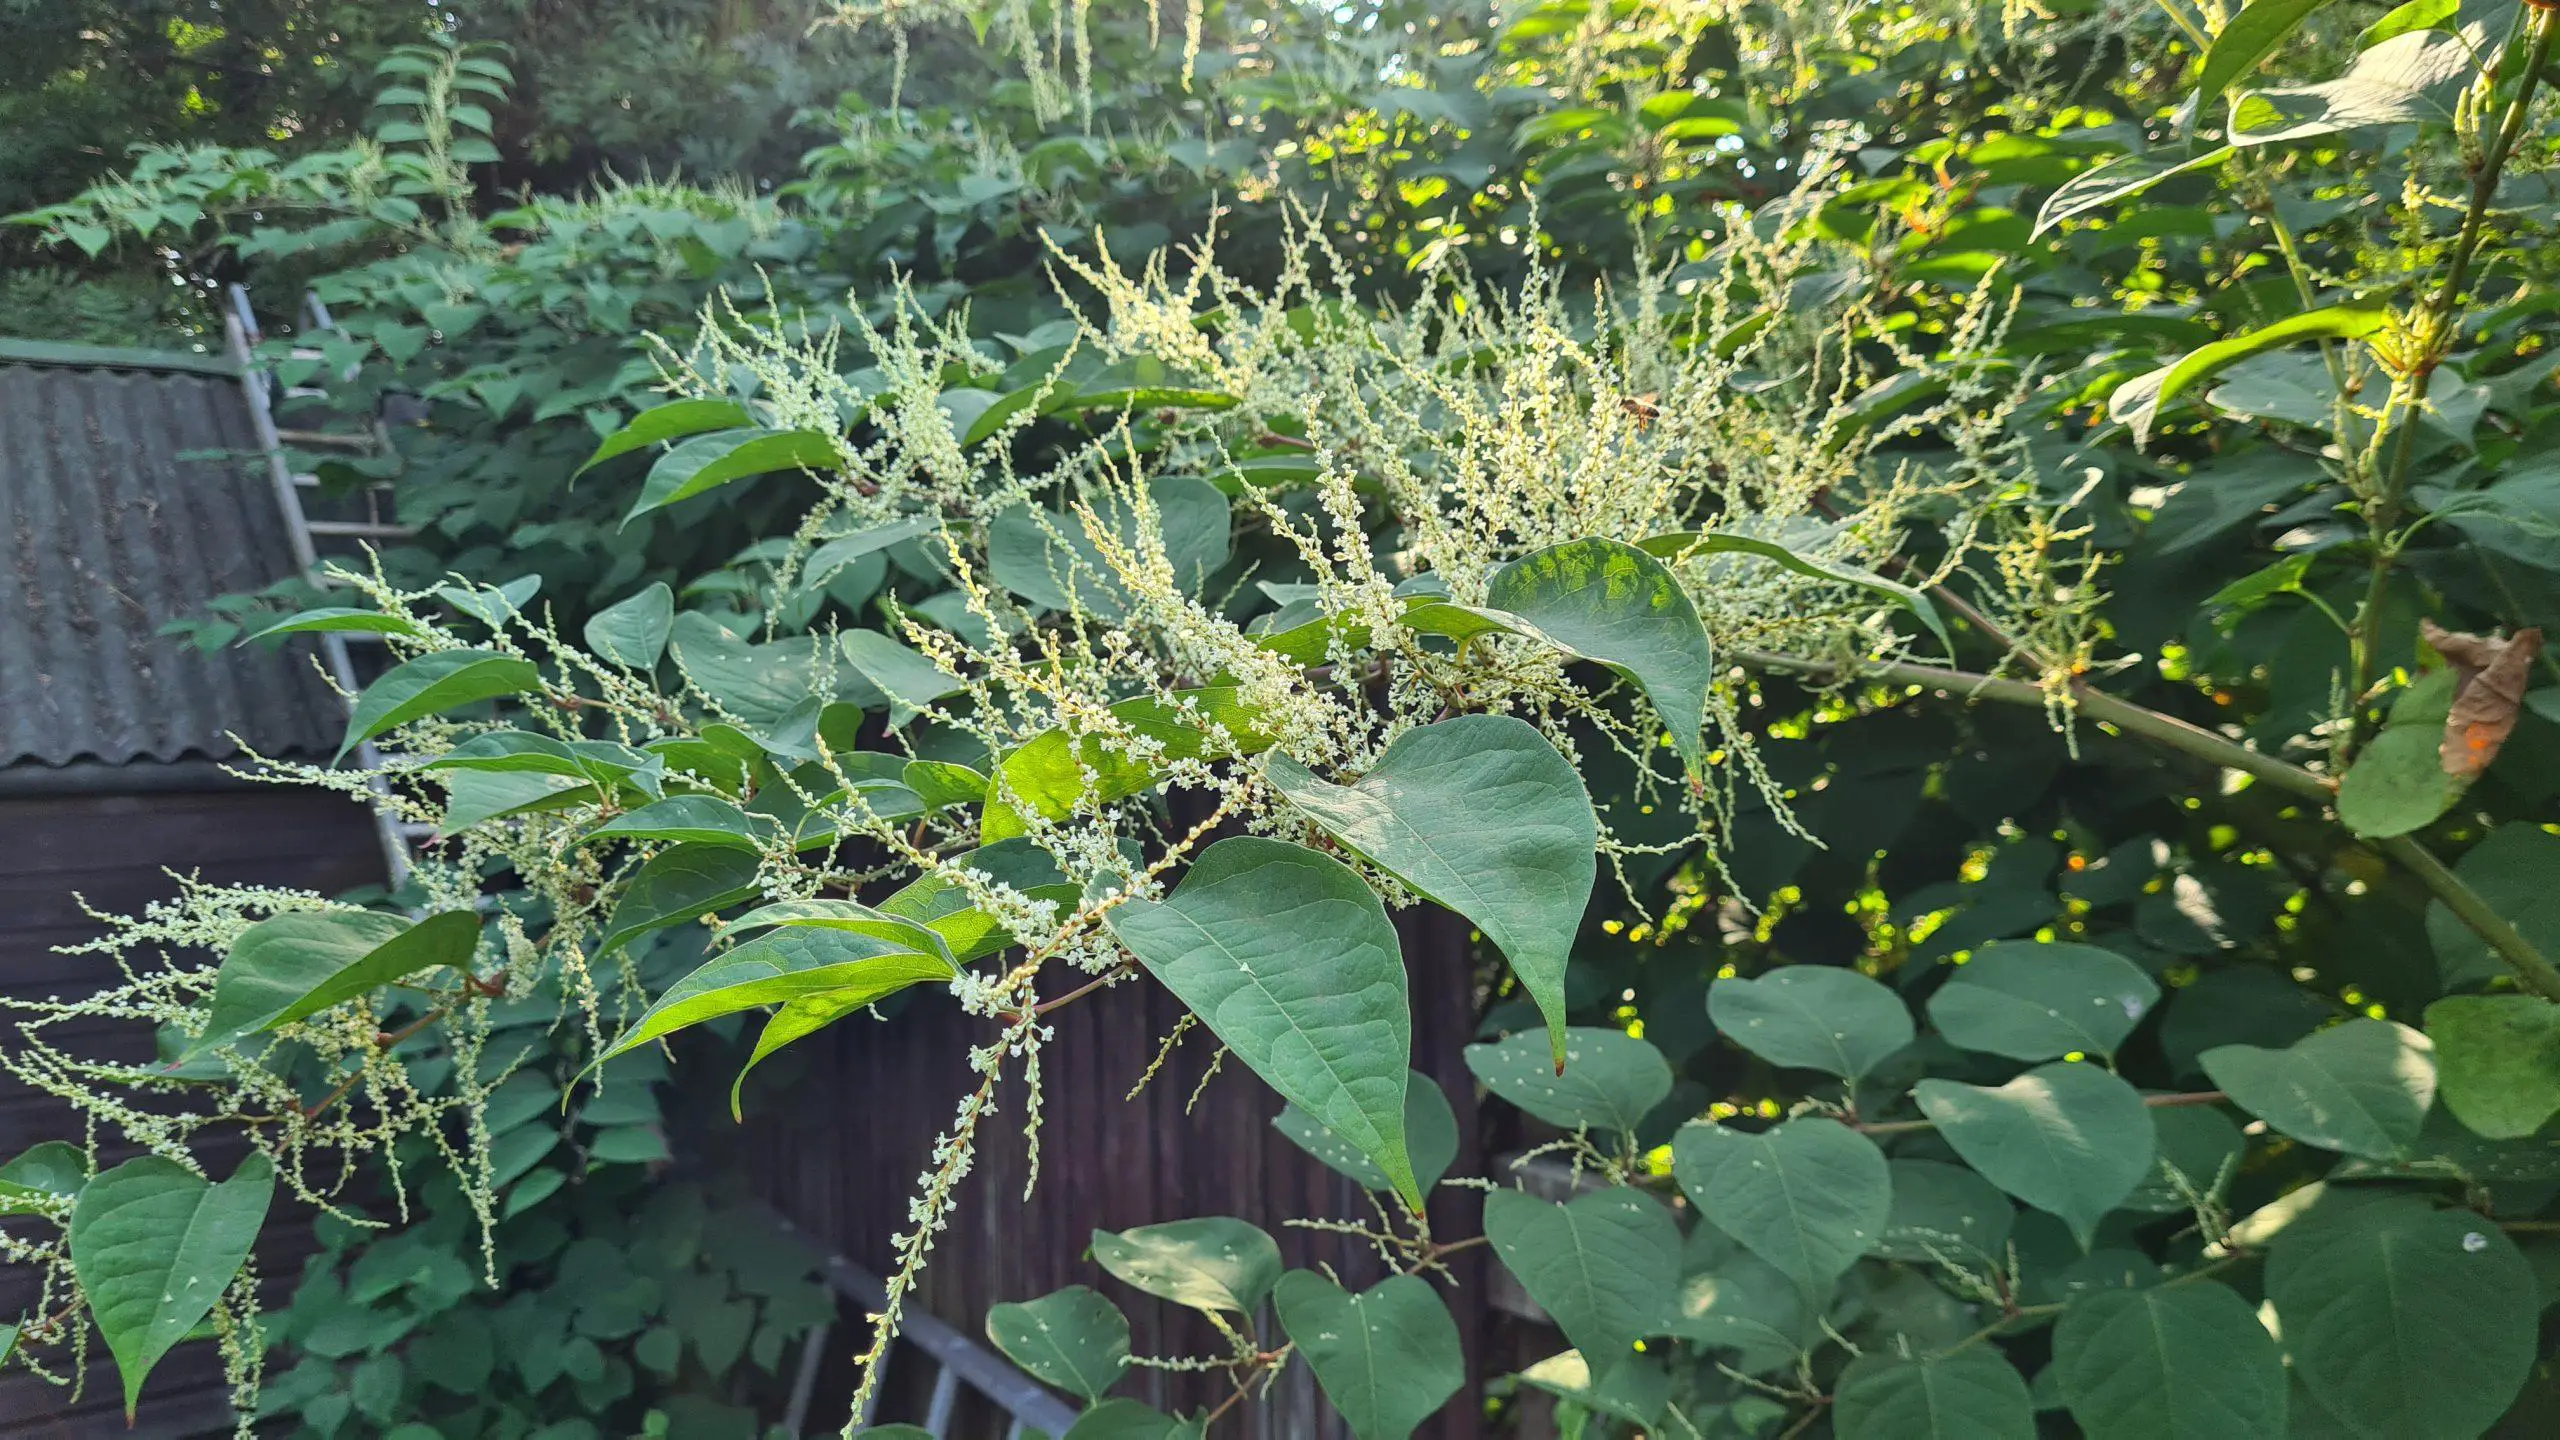 Japanese knotweed grows at an aggressive rate during Spring and Summer